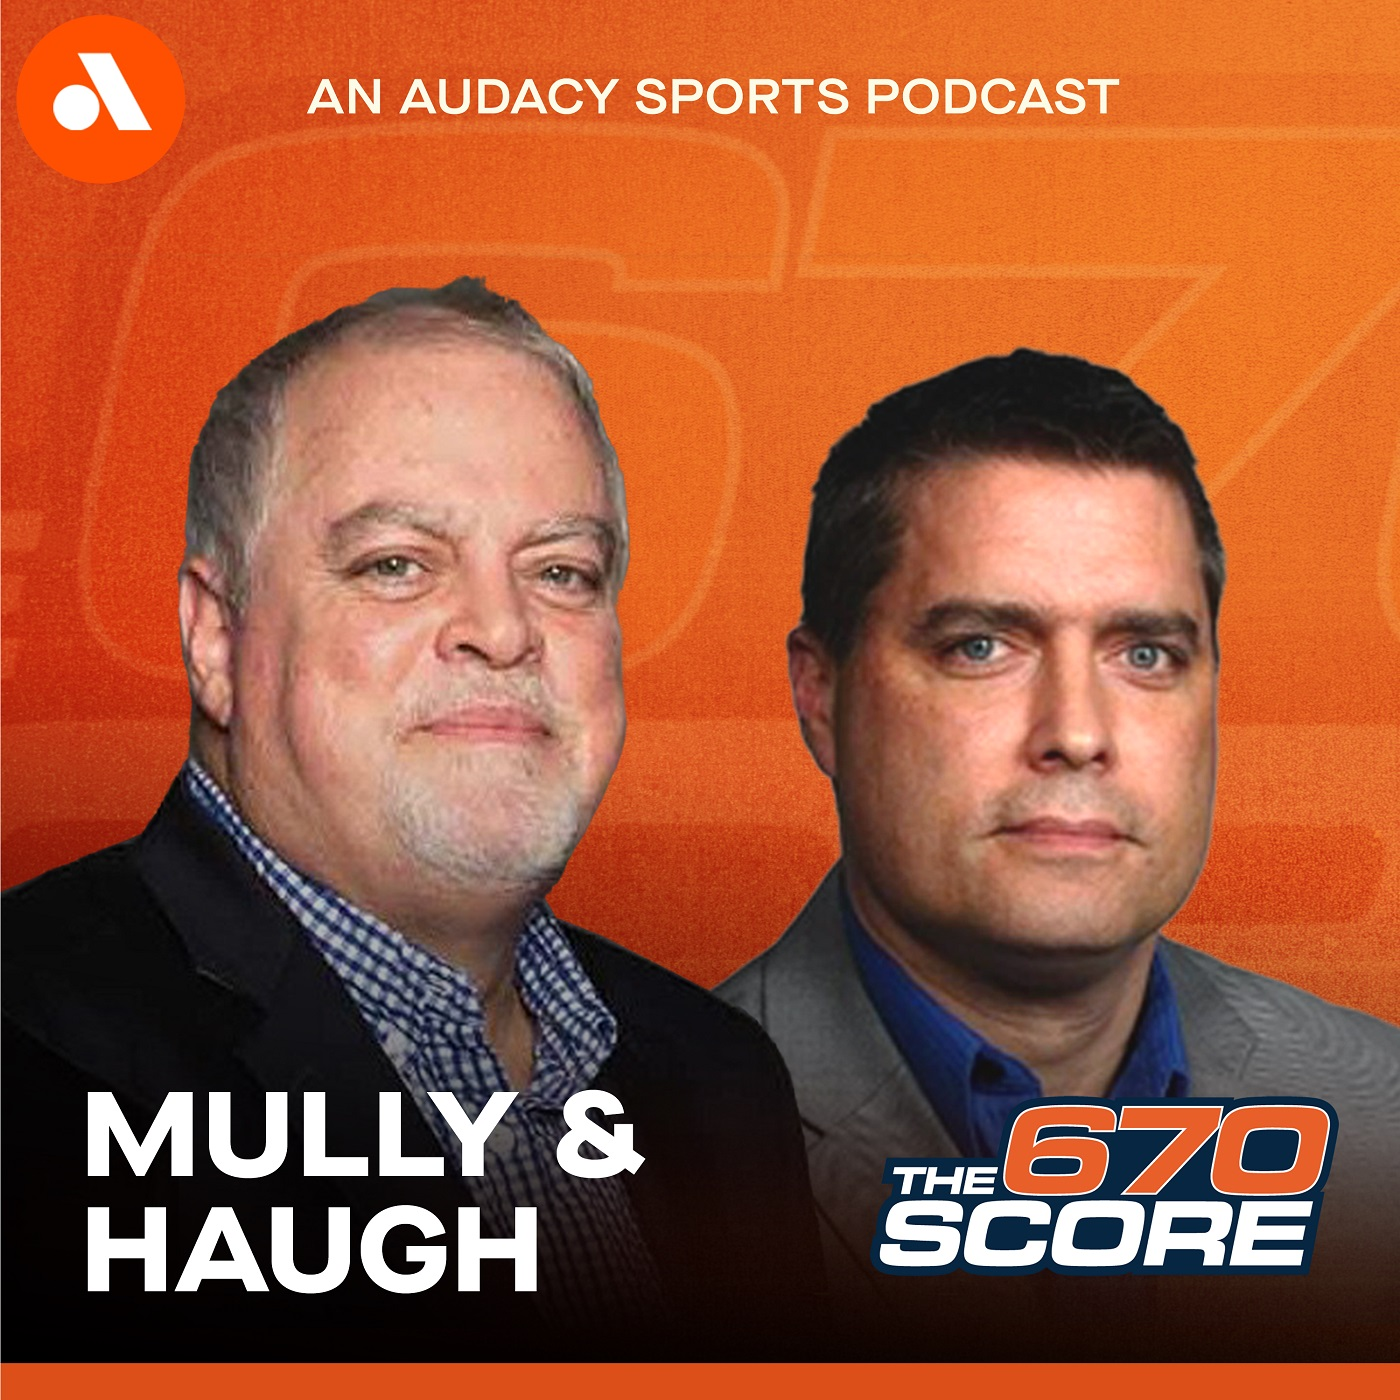 Mully & Haugh: Cubs talk, Marc Ganis interview (Hour 3)